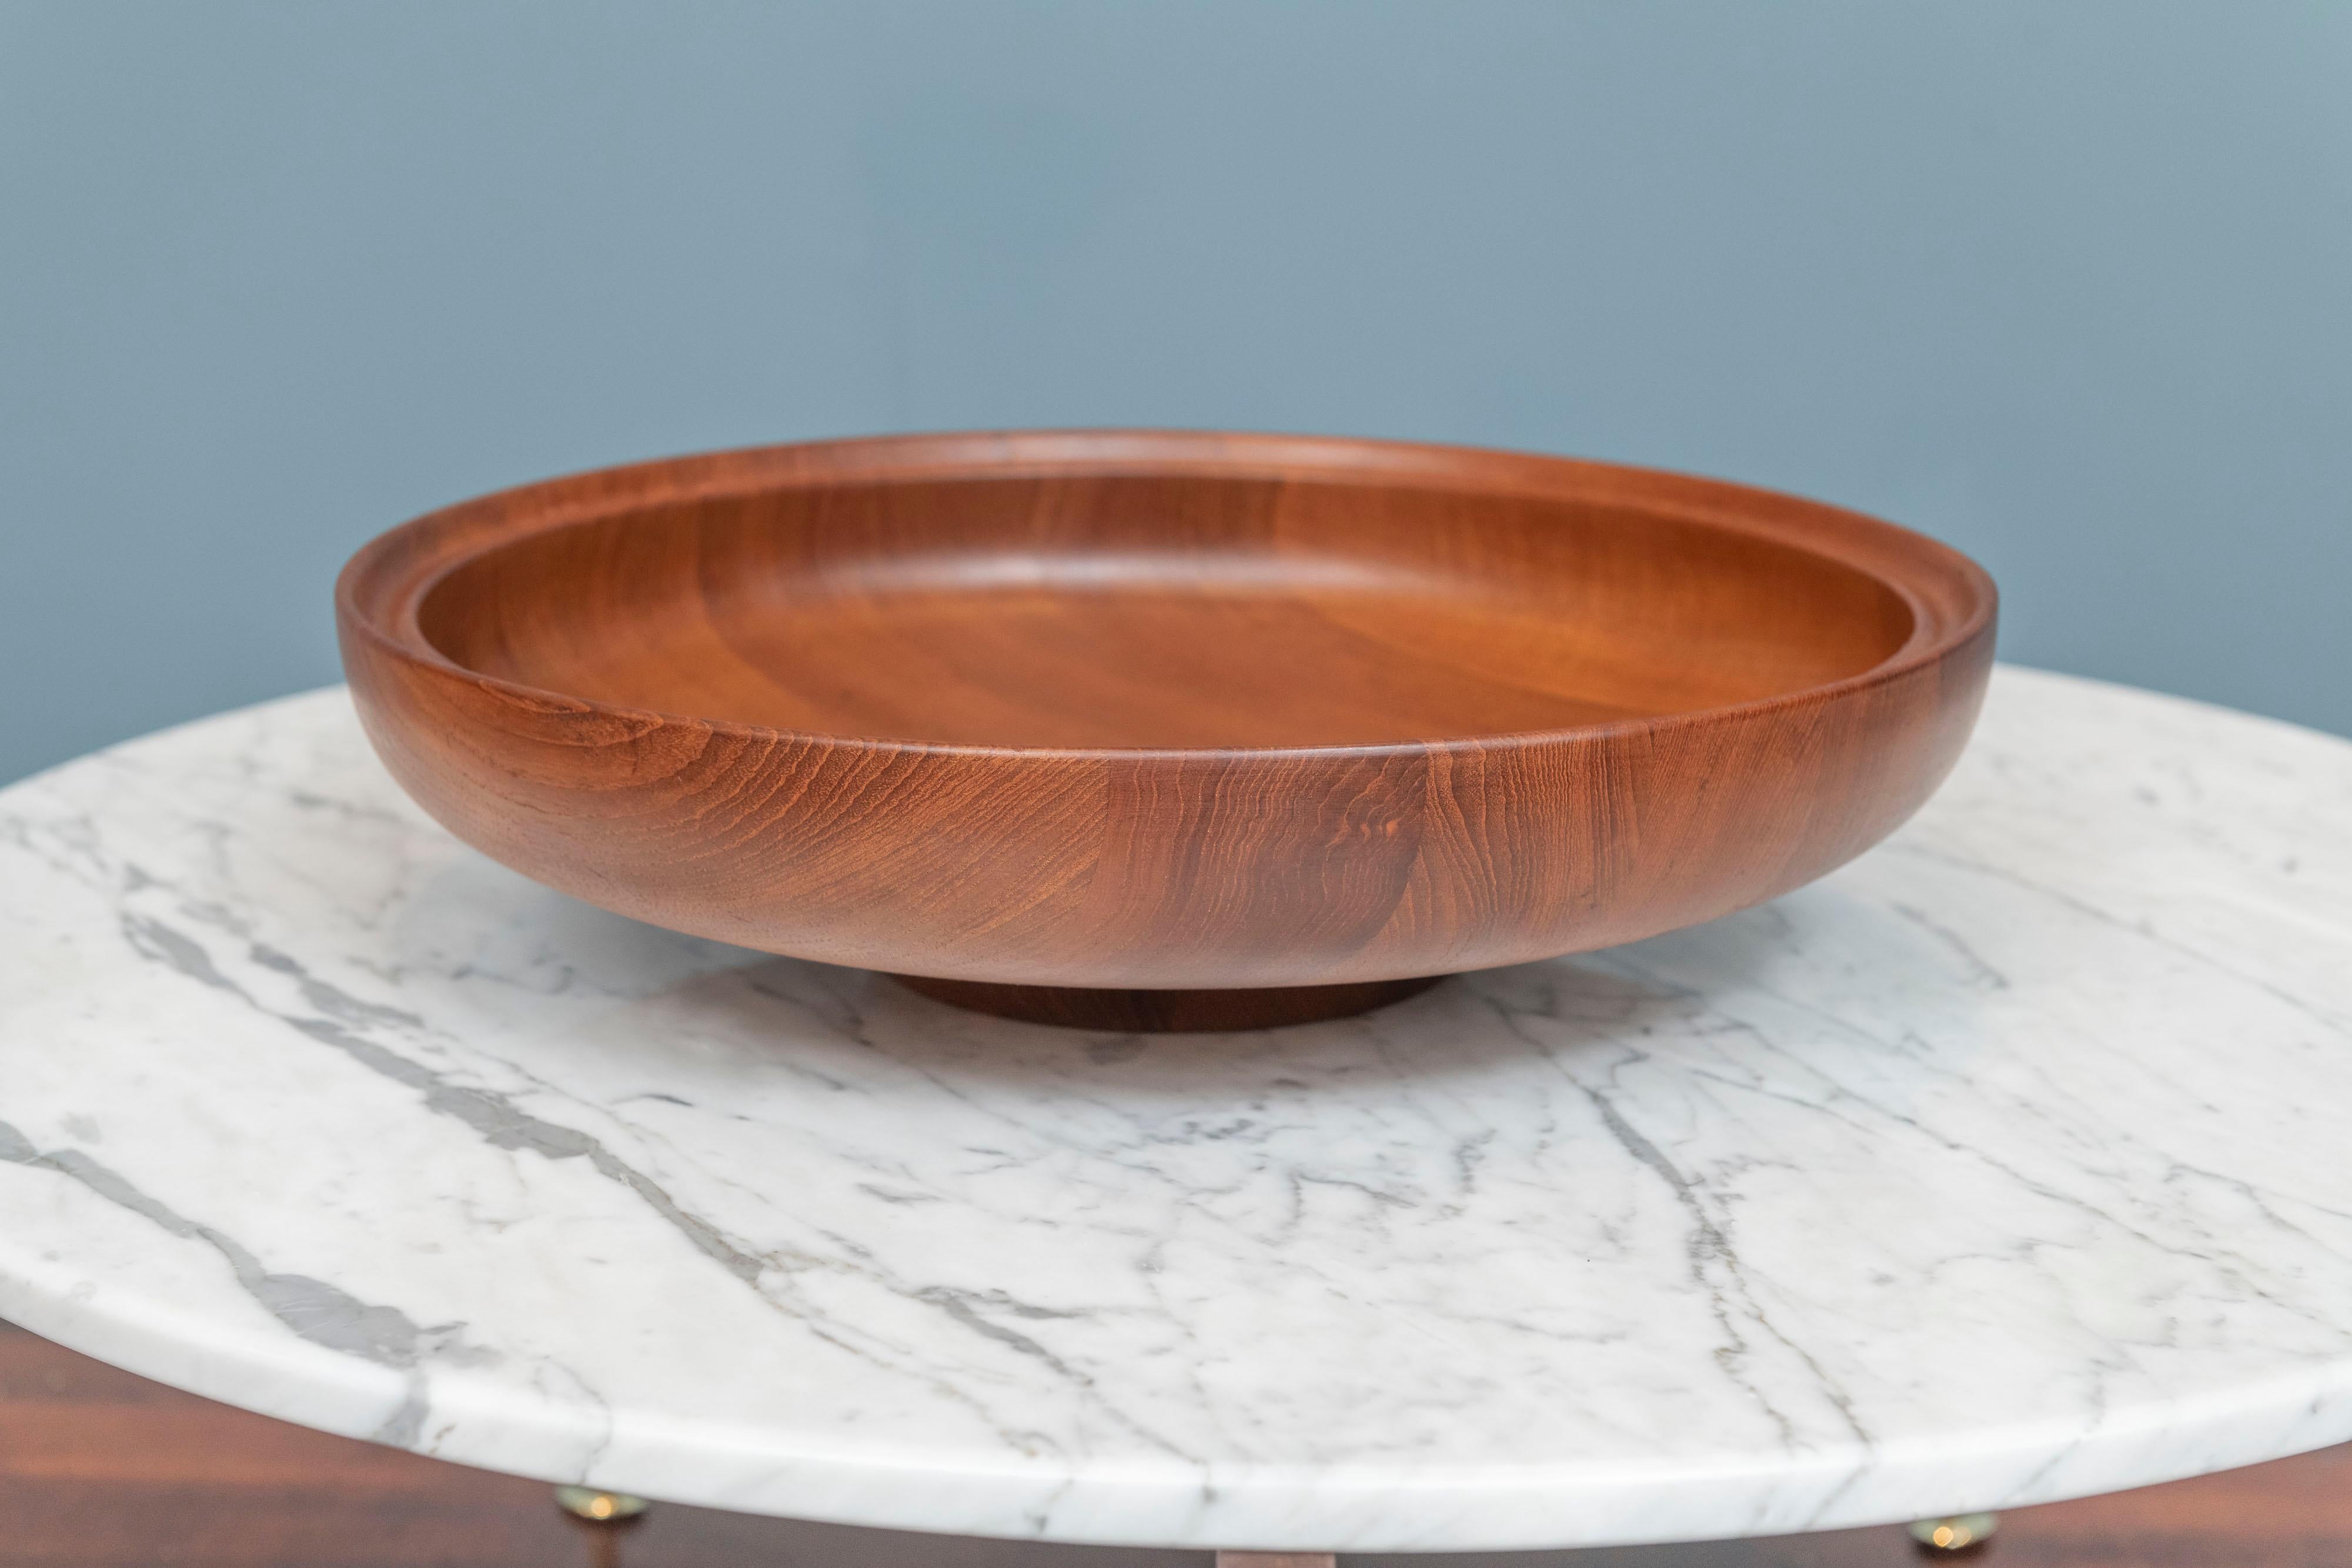 Henning Koppel staved teak bowl for Georg Jensen, Denmark. This seems to be the largest size offered at 19